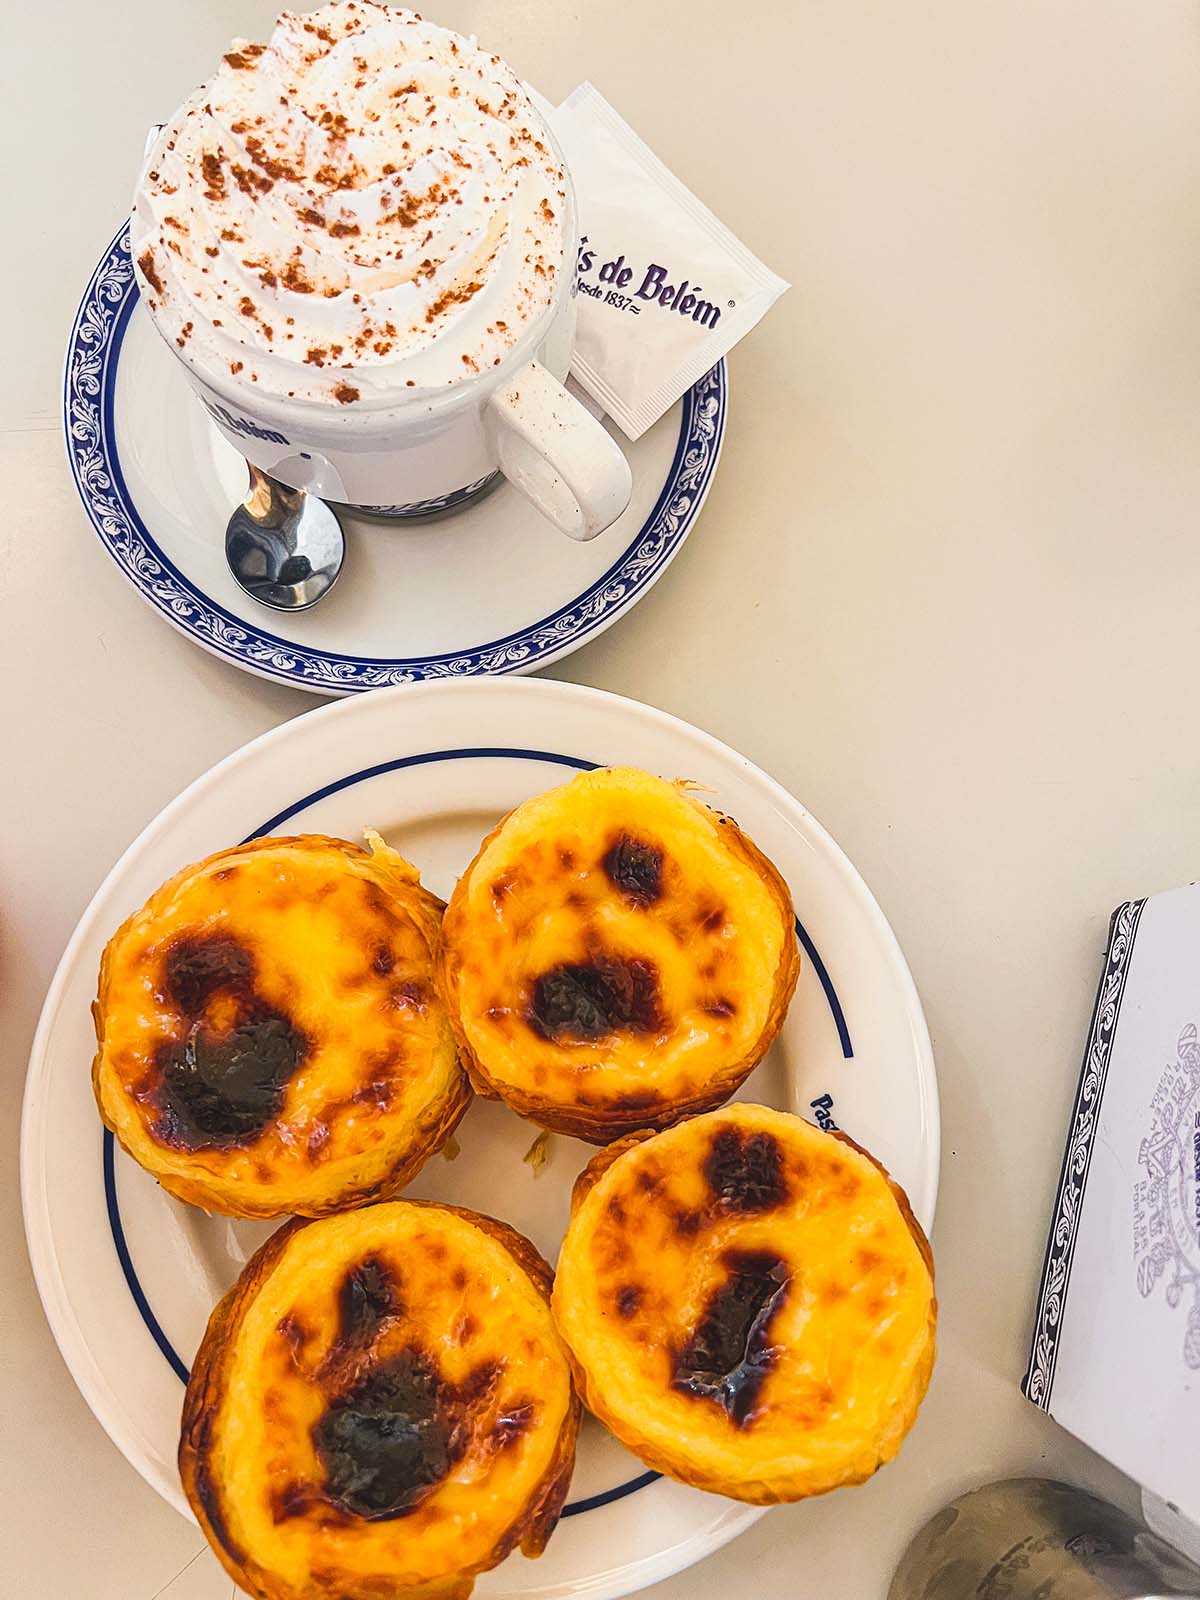 Pasteis de nata on a plate and cappuccinos with whipped cream.